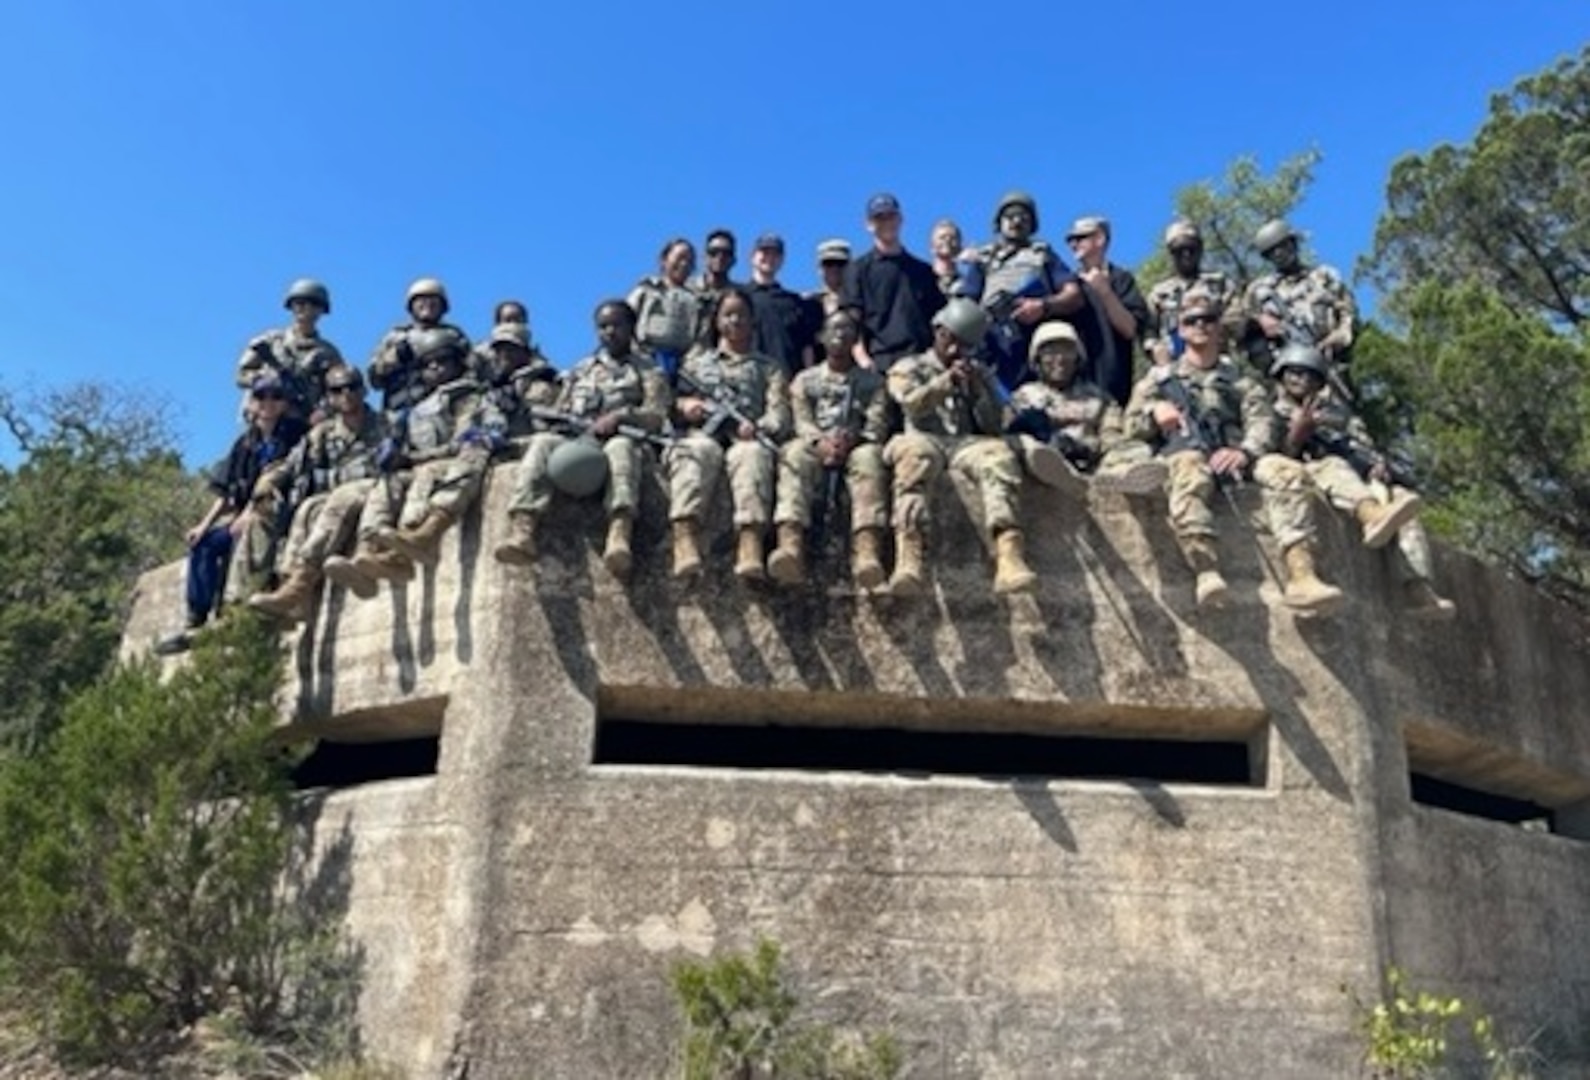 In a first for the Medical Education and Training Campus’ (METC) Pharmacy Technician program, thirty-one Army, Air Force and Coast Guard students jointly conducted a three-day, field training exercise on JBSA-Camp Bullis, Texas July 12-15.